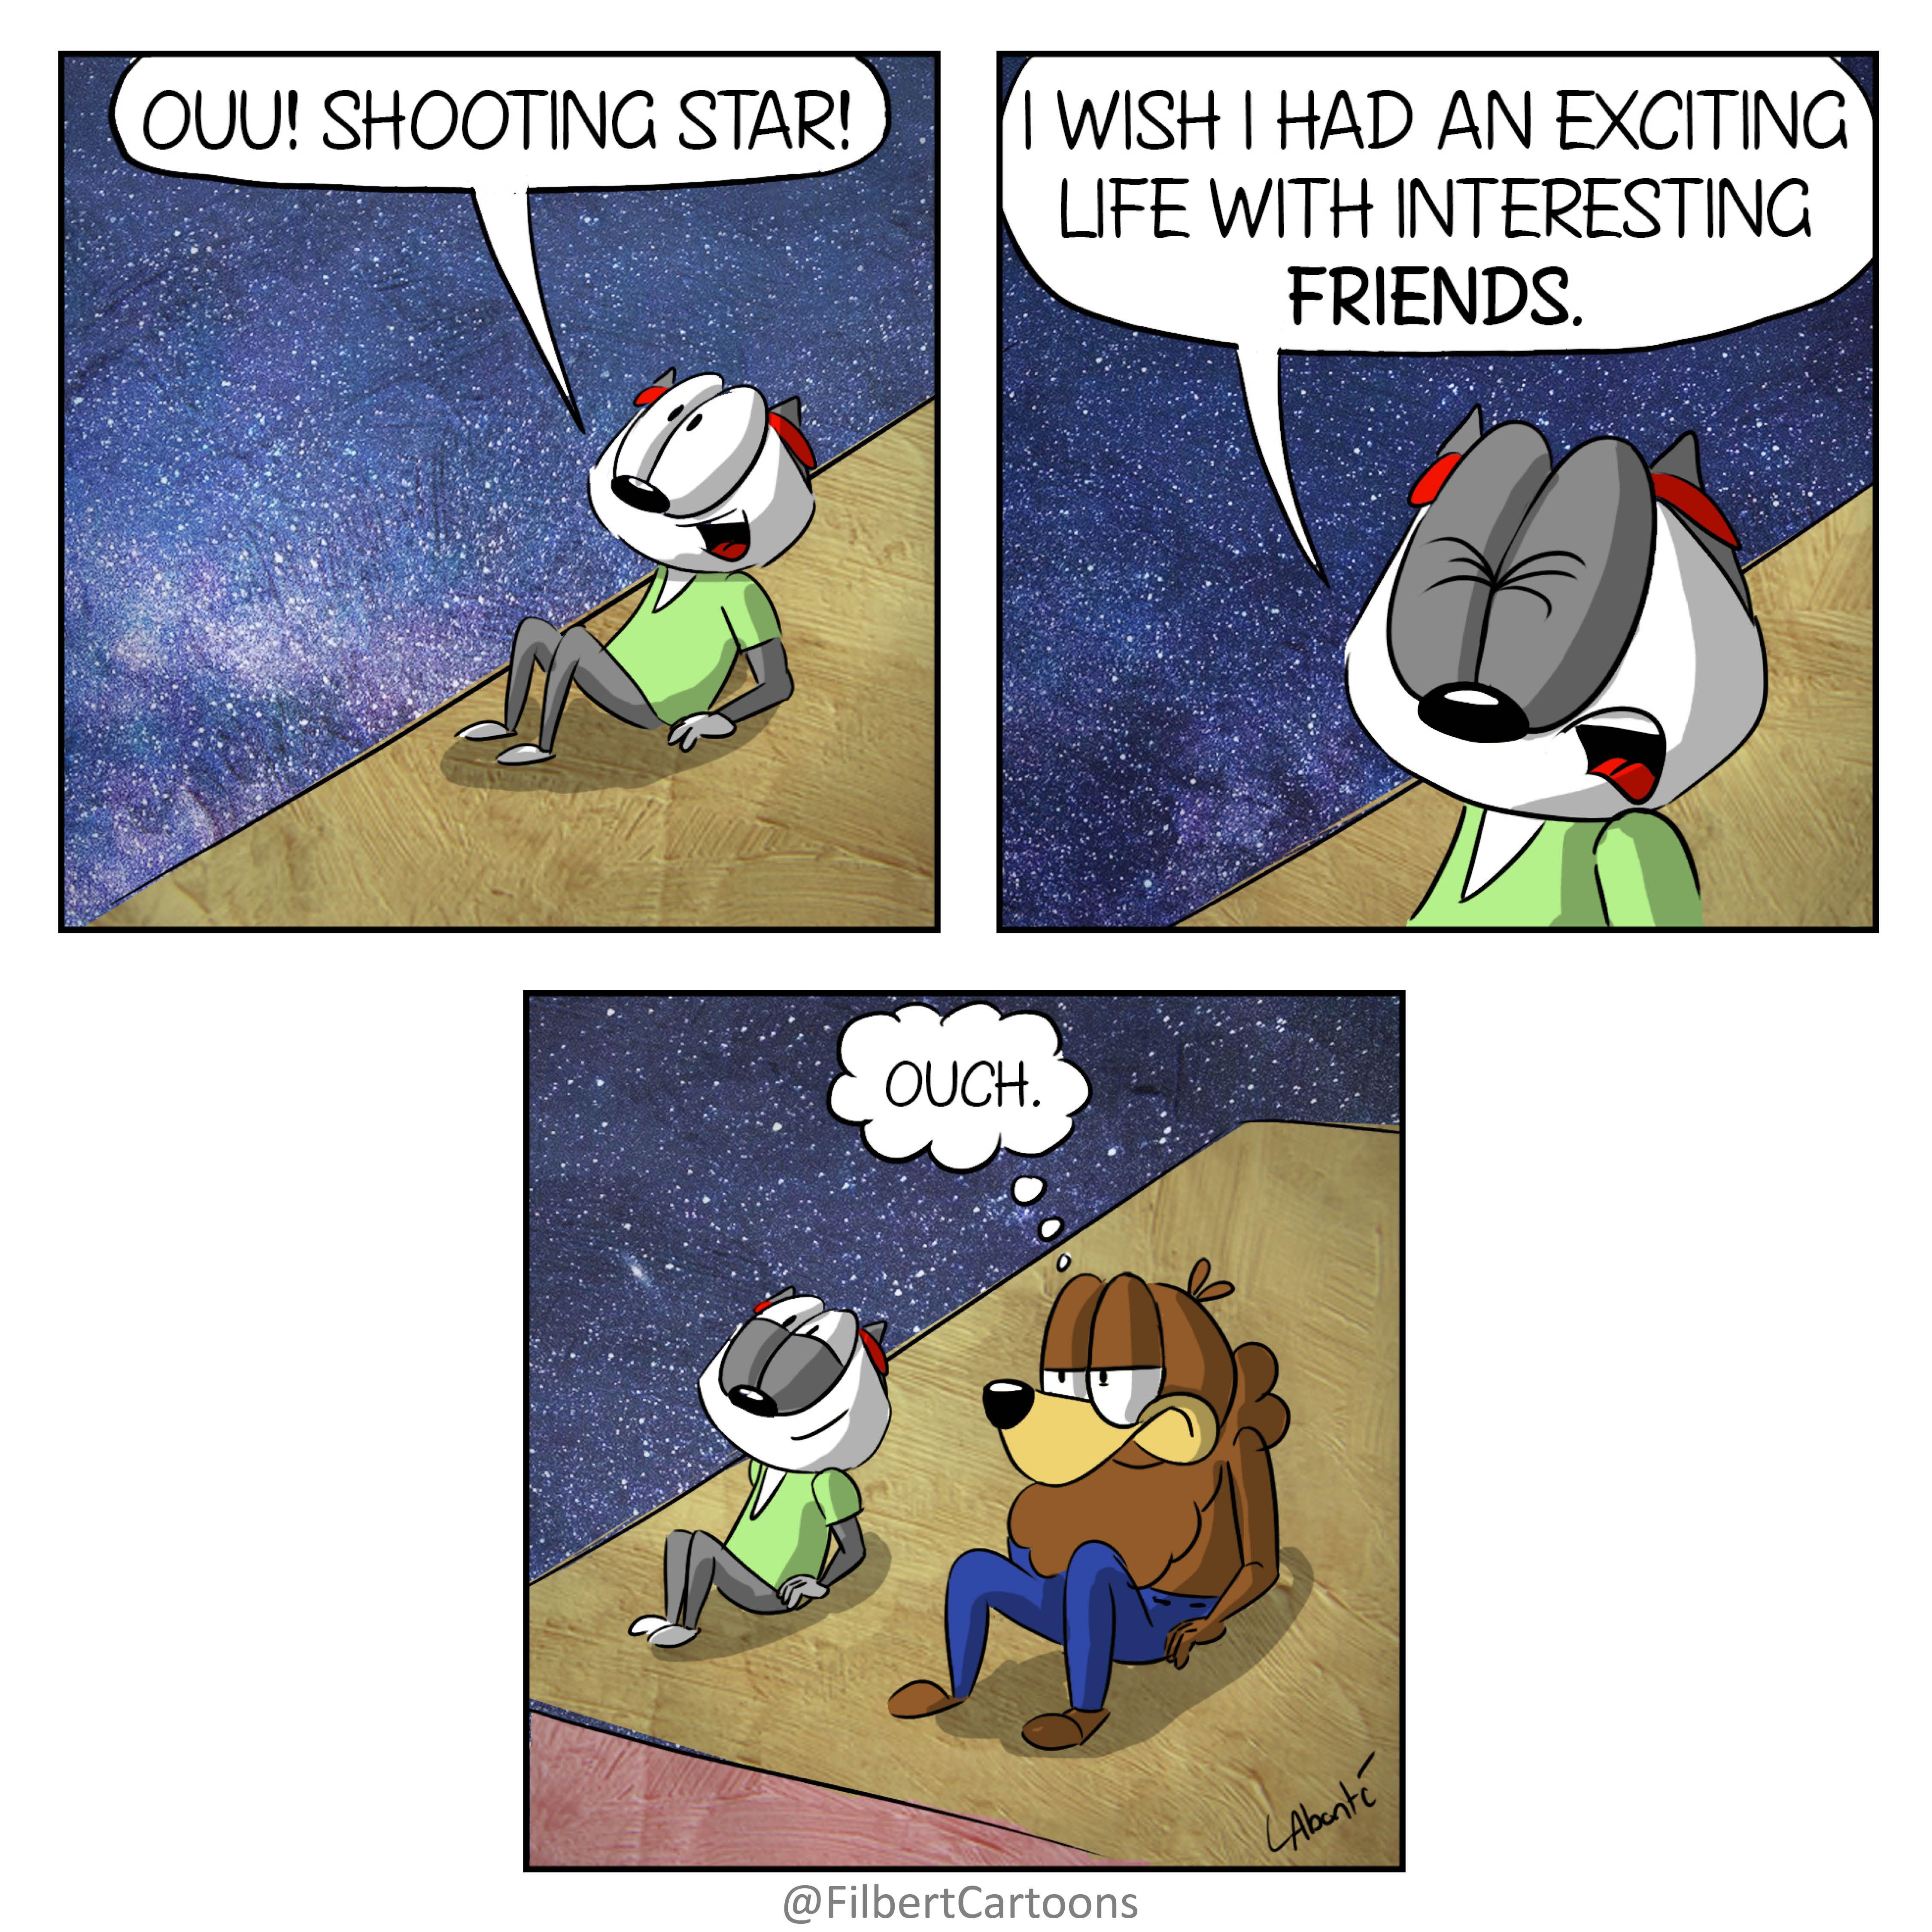 When You Wish Upon a Star.... [OC]